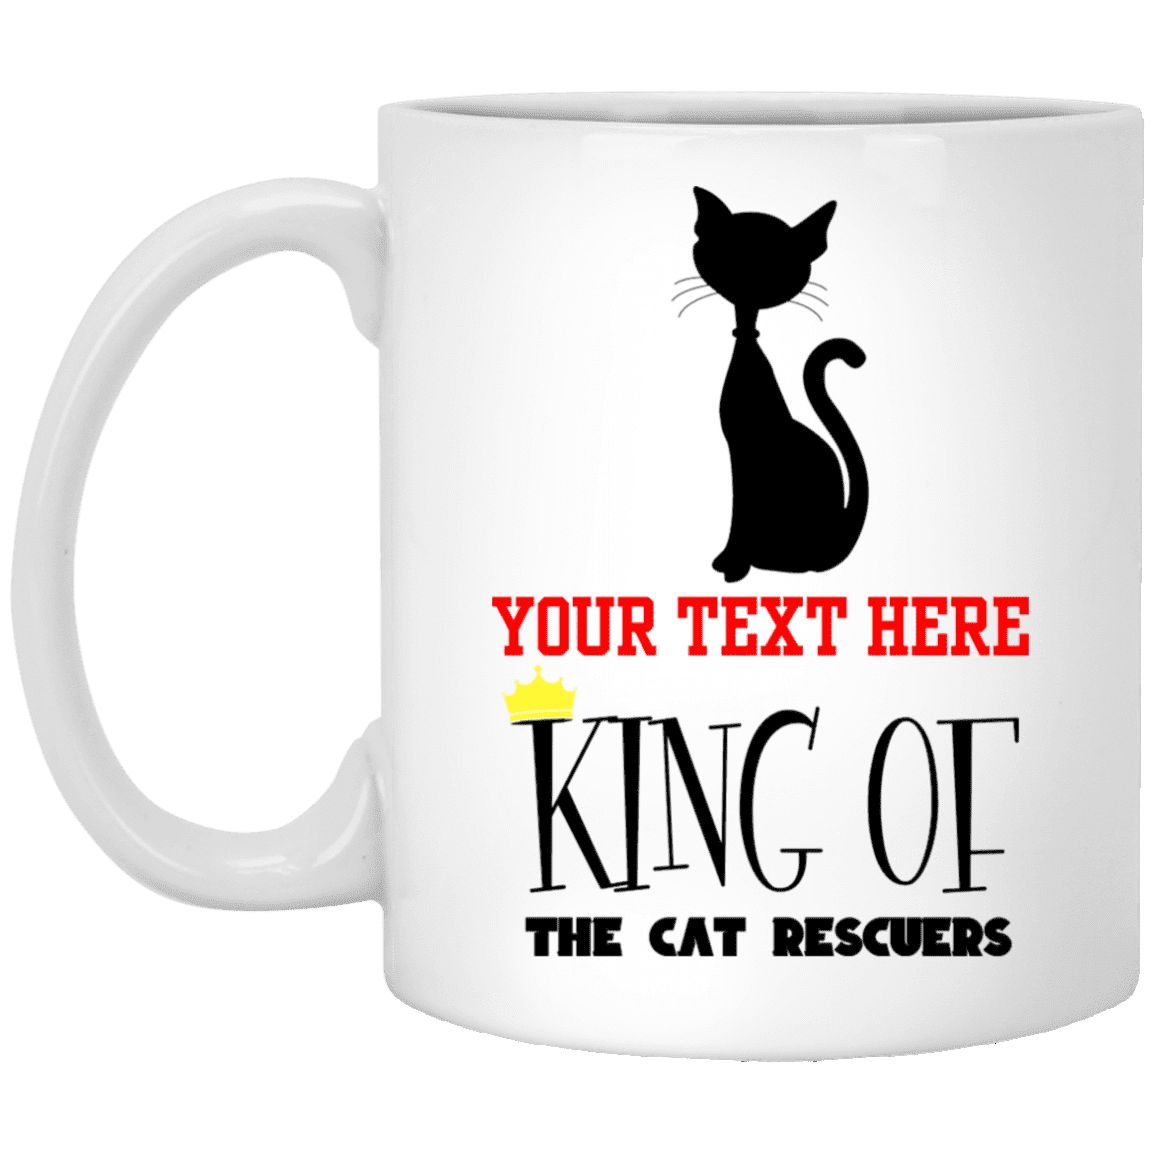 Personalized King Of The Cat Rescuers - Mugs.